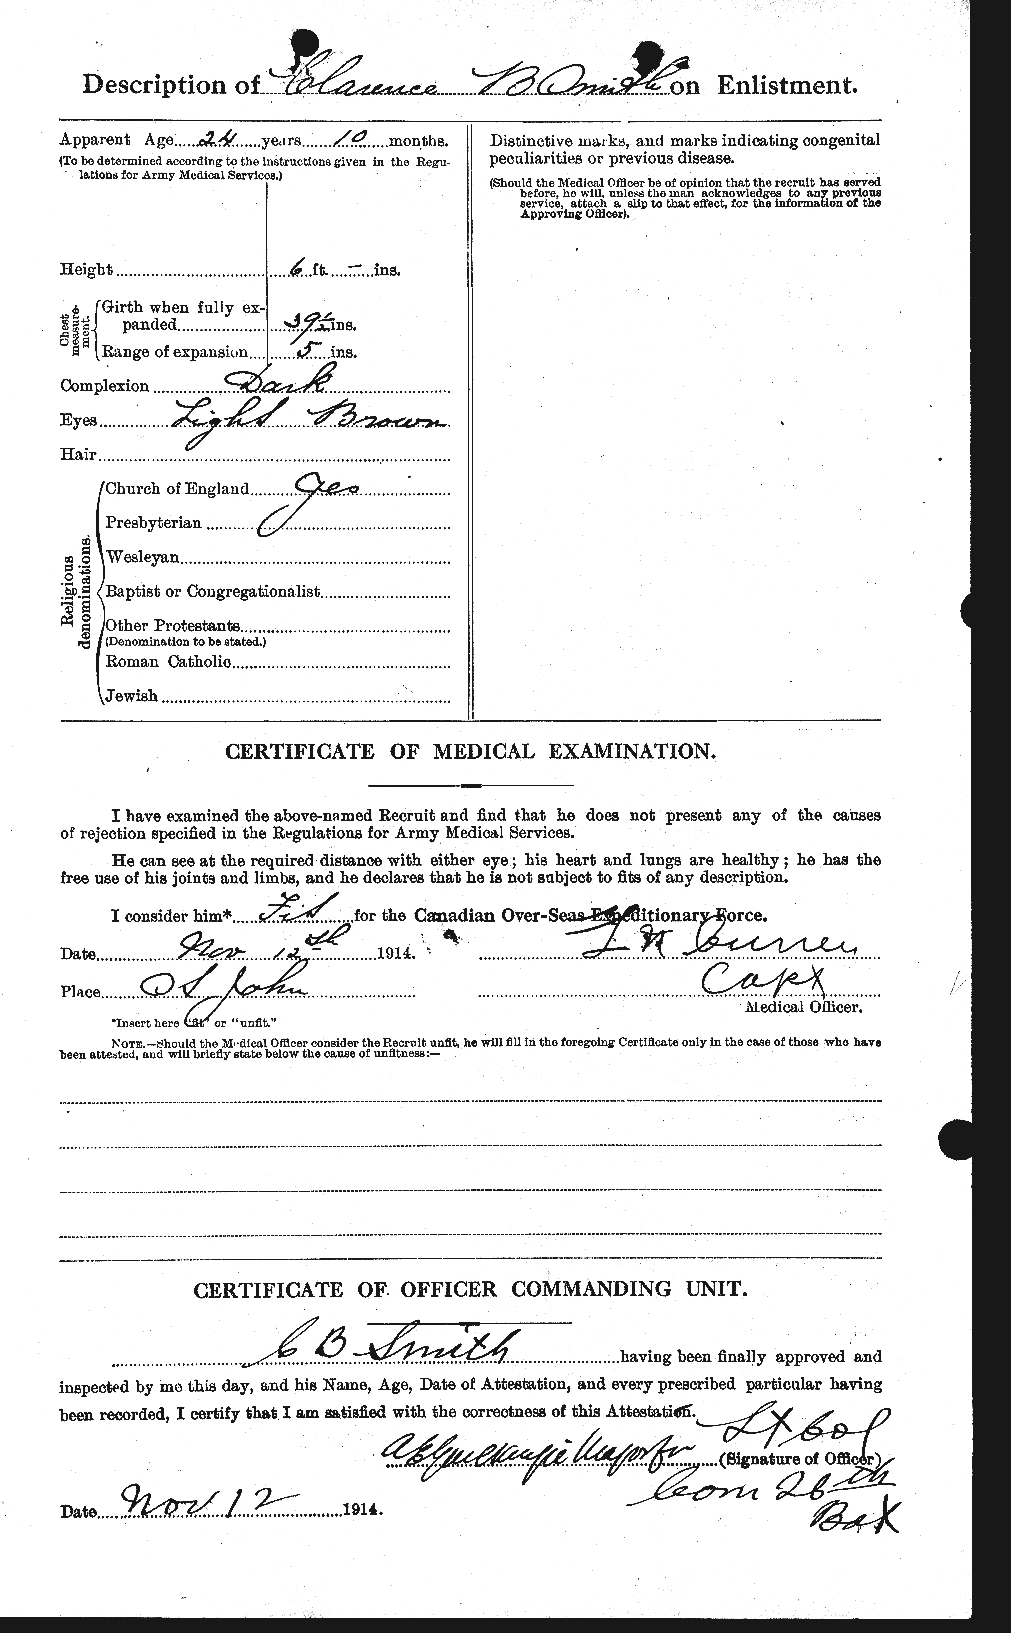 Personnel Records of the First World War - CEF 104013b